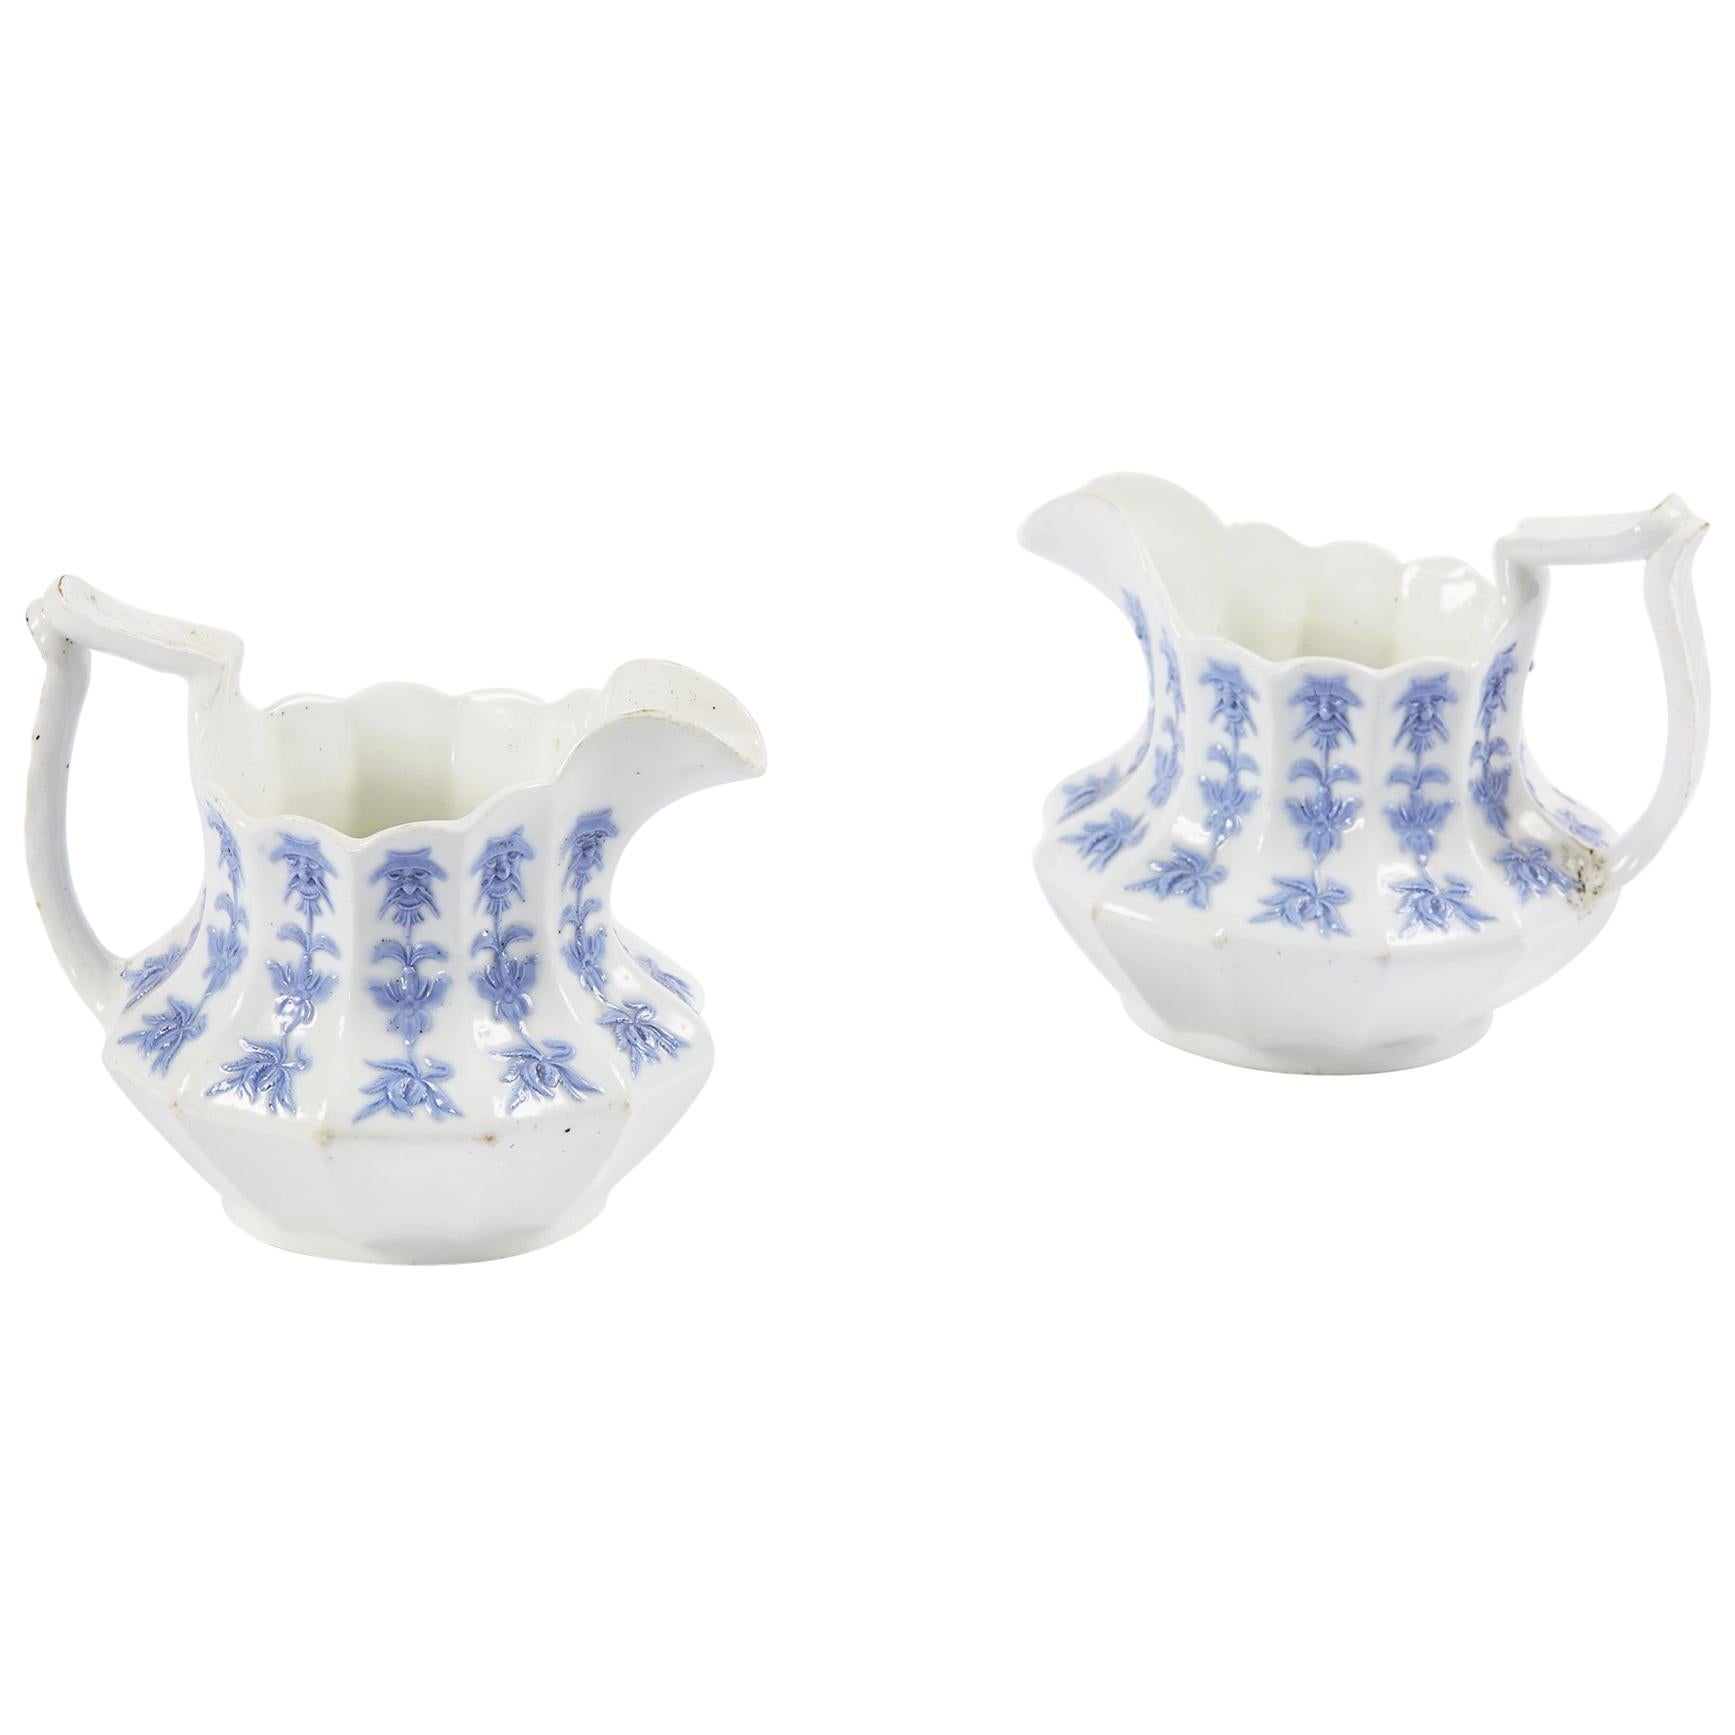 19th Century German Pair of Porcelain Blue and White Jugs